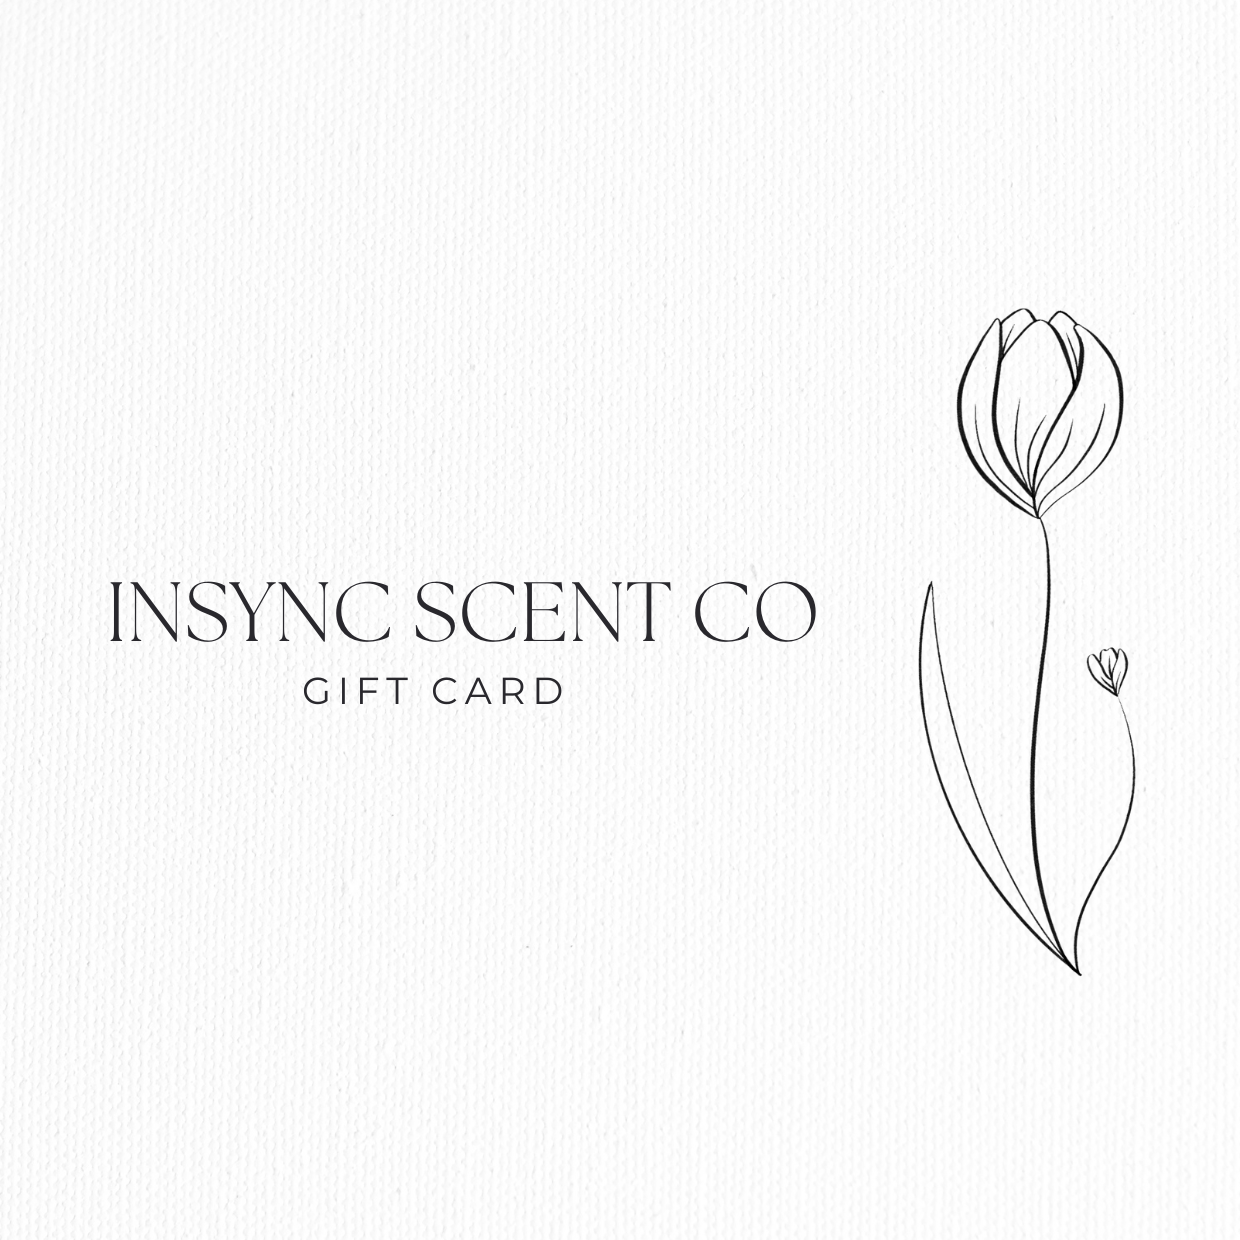 Insync Scent Co Gift Card